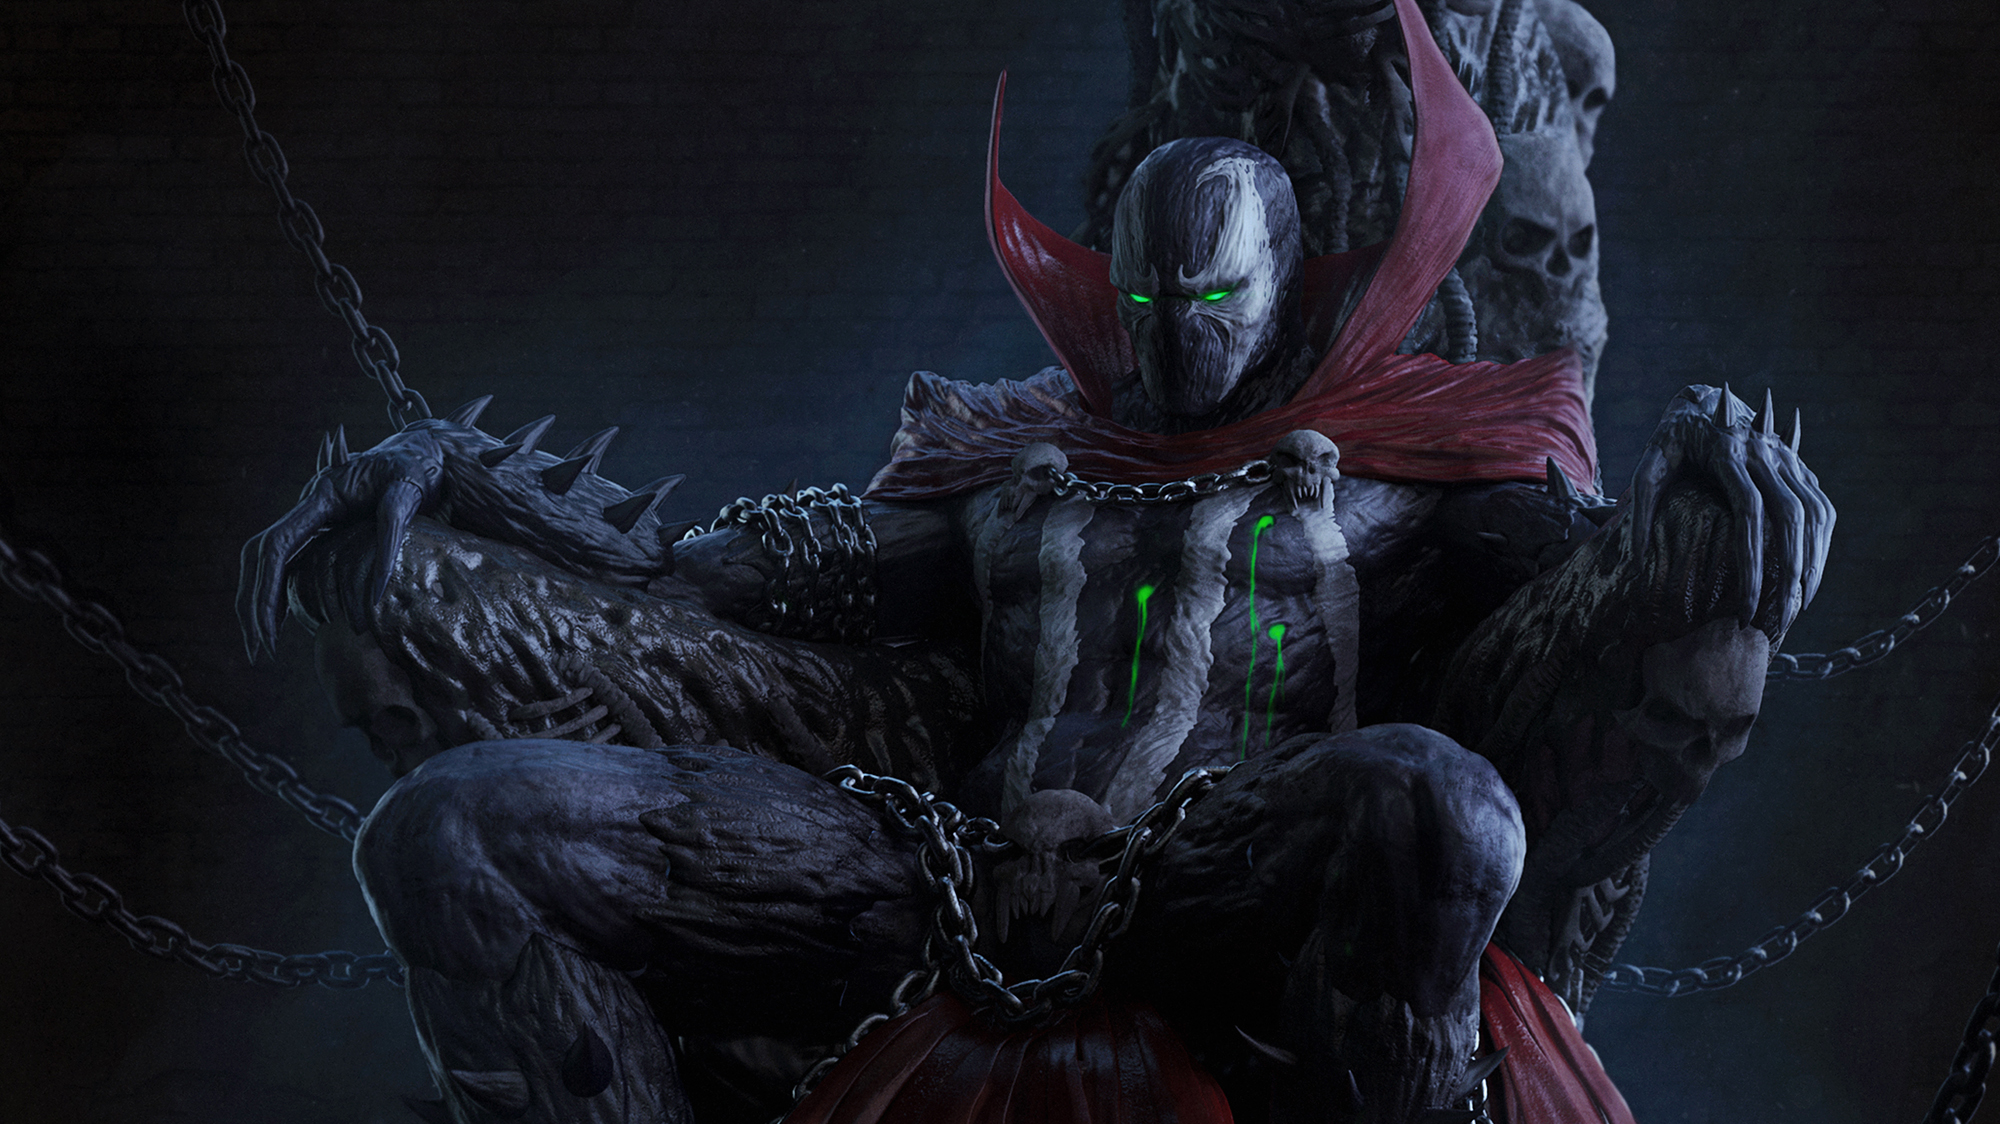 Spawn Image Comics Chain Throne Cape Spikes Glowing Eyes 2000x1124